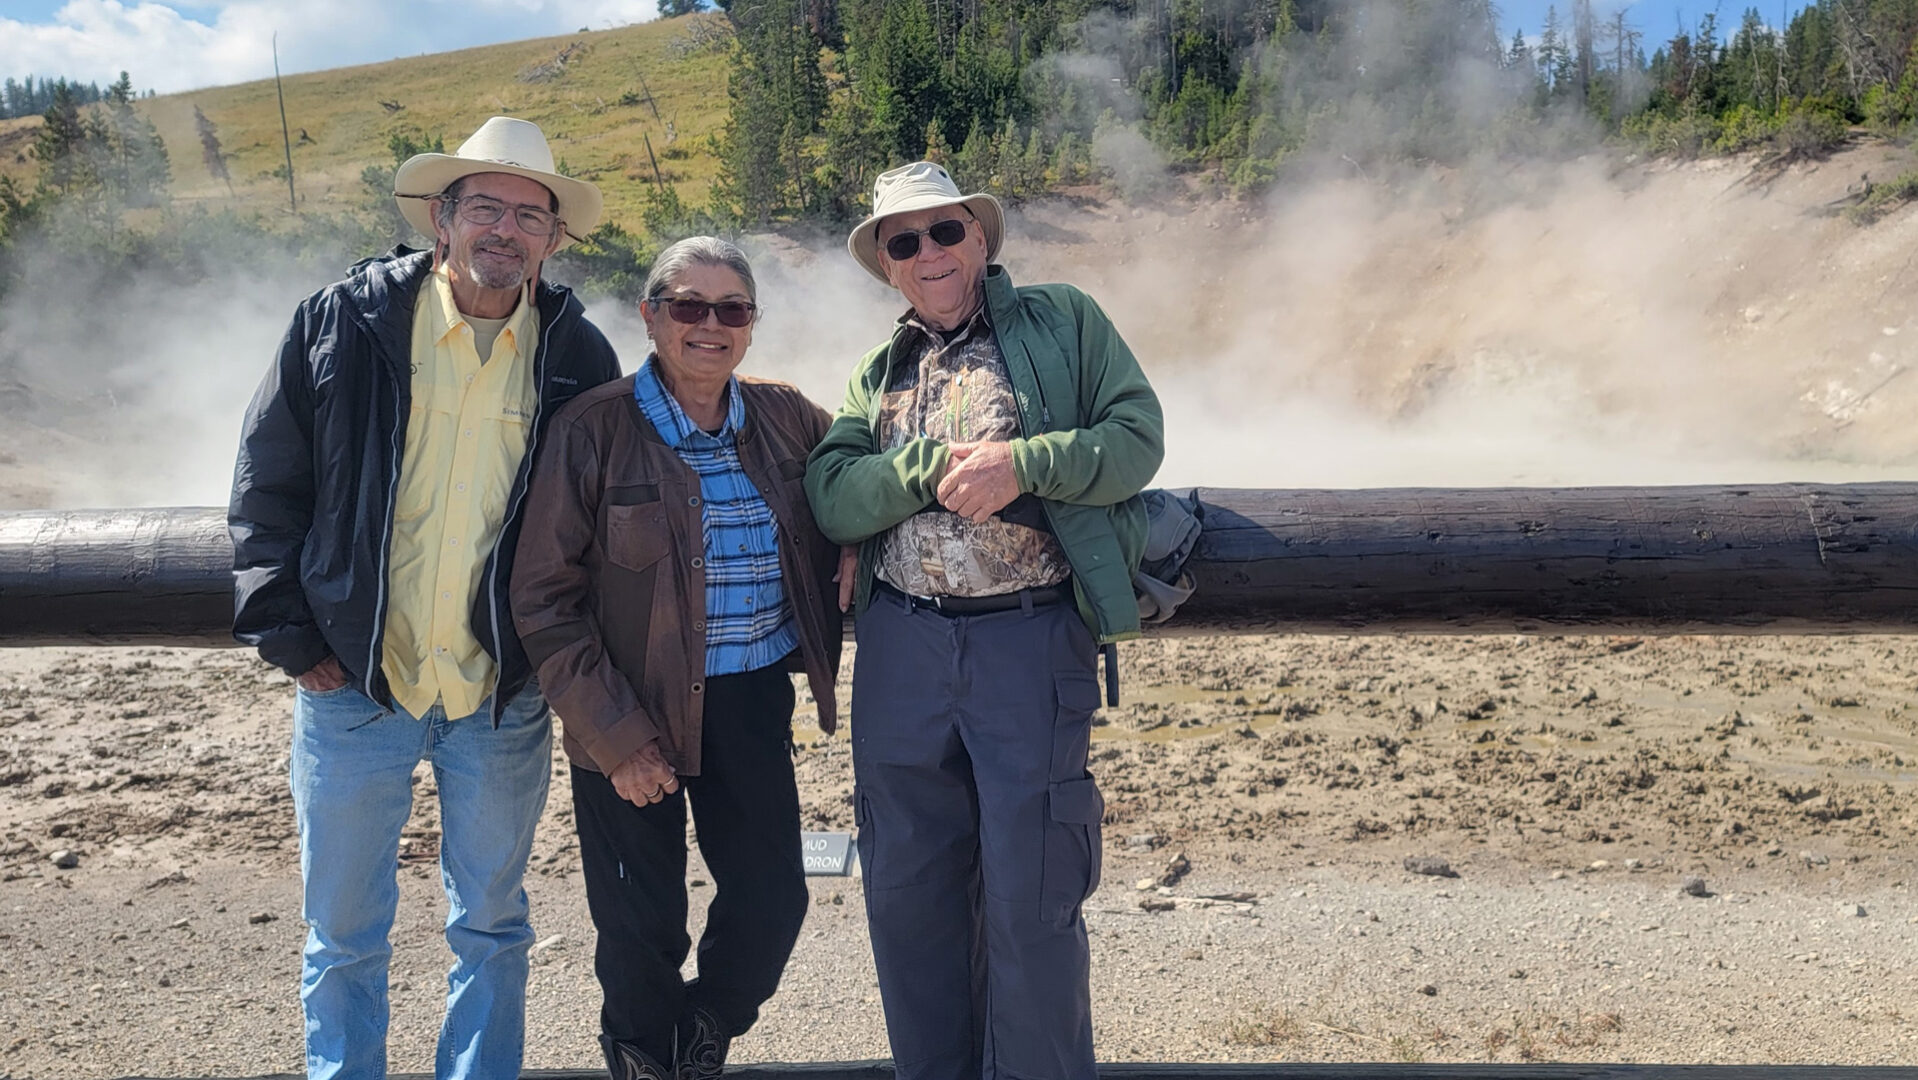 John, Donna, and Deane in Yellowstone Nat. Park